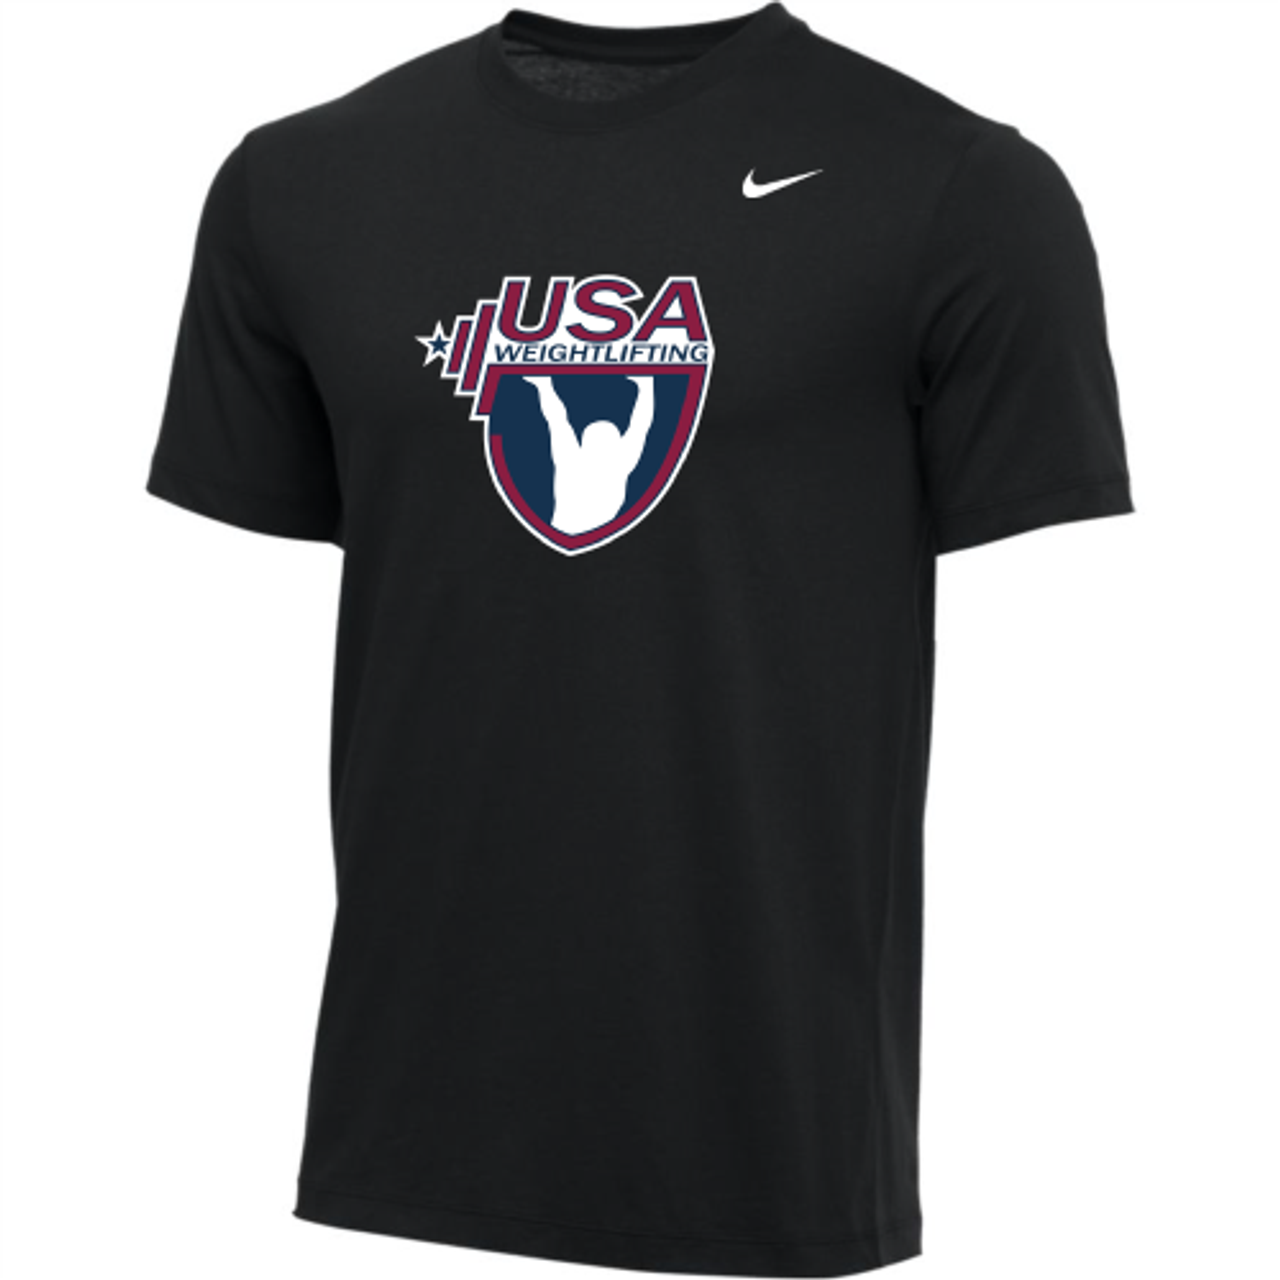 Gobernable Realizable Cumplimiento a Nike Men's USA Weightlifting Tee - Black